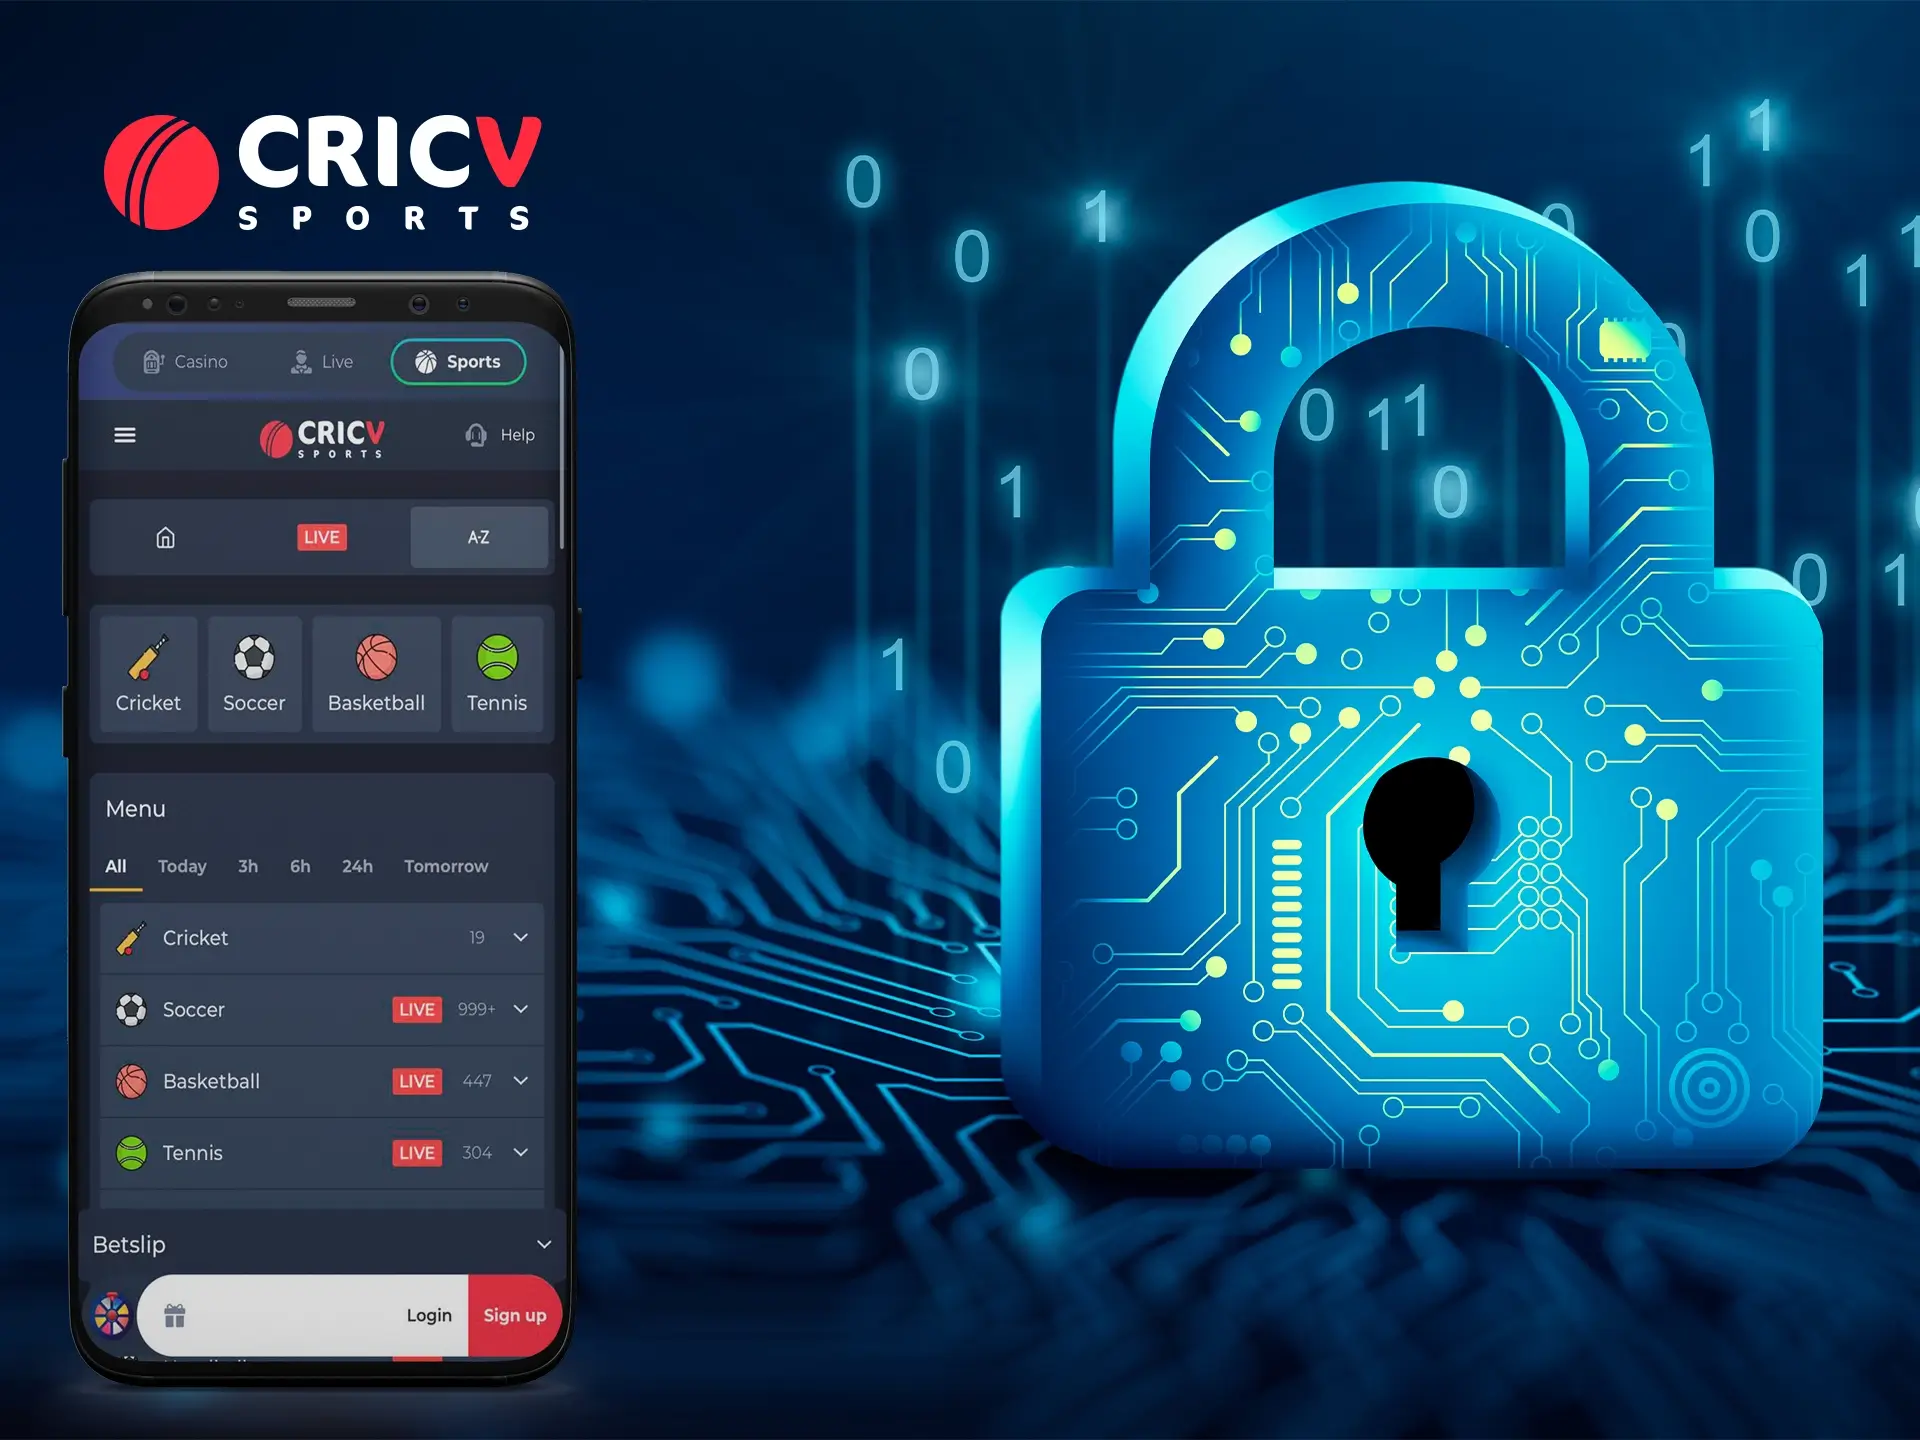 Don't worry about your data as Cricv is a trustworthy casino and has the latest security technology.